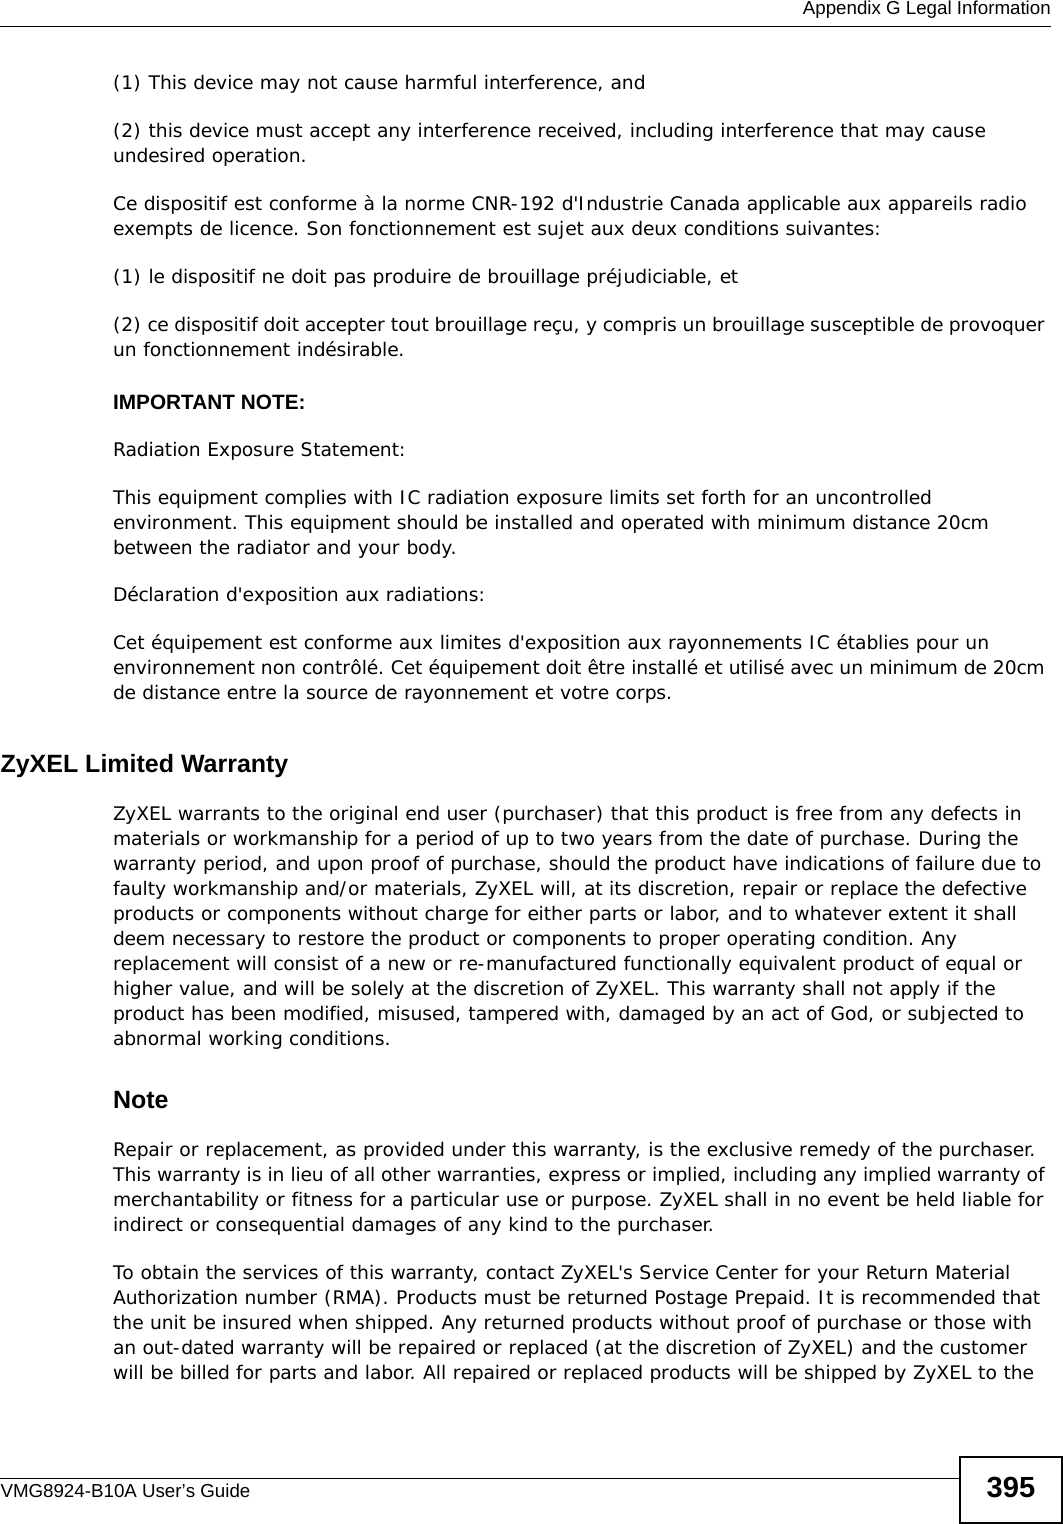  Appendix G Legal InformationVMG8924-B10A User’s Guide 395(1) This device may not cause harmful interference, and(2) this device must accept any interference received, including interference that may cause undesired operation.  Ce dispositif est conforme à la norme CNR-192 d&apos;Industrie Canada applicable aux appareils radio exempts de licence. Son fonctionnement est sujet aux deux conditions suivantes:(1) le dispositif ne doit pas produire de brouillage préjudiciable, et(2) ce dispositif doit accepter tout brouillage reçu, y compris un brouillage susceptible de provoquer un fonctionnement indésirable. IMPORTANT NOTE: Radiation Exposure Statement:This equipment complies with IC radiation exposure limits set forth for an uncontrolled environment. This equipment should be installed and operated with minimum distance 20cm between the radiator and your body.Déclaration d&apos;exposition aux radiations:Cet équipement est conforme aux limites d&apos;exposition aux rayonnements IC établies pour un environnement non contrôlé. Cet équipement doit être installé et utilisé avec un minimum de 20cm de distance entre la source de rayonnement et votre corps.ZyXEL Limited WarrantyZyXEL warrants to the original end user (purchaser) that this product is free from any defects in materials or workmanship for a period of up to two years from the date of purchase. During the warranty period, and upon proof of purchase, should the product have indications of failure due to faulty workmanship and/or materials, ZyXEL will, at its discretion, repair or replace the defective products or components without charge for either parts or labor, and to whatever extent it shall deem necessary to restore the product or components to proper operating condition. Any replacement will consist of a new or re-manufactured functionally equivalent product of equal or higher value, and will be solely at the discretion of ZyXEL. This warranty shall not apply if the product has been modified, misused, tampered with, damaged by an act of God, or subjected to abnormal working conditions.NoteRepair or replacement, as provided under this warranty, is the exclusive remedy of the purchaser. This warranty is in lieu of all other warranties, express or implied, including any implied warranty of merchantability or fitness for a particular use or purpose. ZyXEL shall in no event be held liable for indirect or consequential damages of any kind to the purchaser.To obtain the services of this warranty, contact ZyXEL&apos;s Service Center for your Return Material Authorization number (RMA). Products must be returned Postage Prepaid. It is recommended that the unit be insured when shipped. Any returned products without proof of purchase or those with an out-dated warranty will be repaired or replaced (at the discretion of ZyXEL) and the customer will be billed for parts and labor. All repaired or replaced products will be shipped by ZyXEL to the 